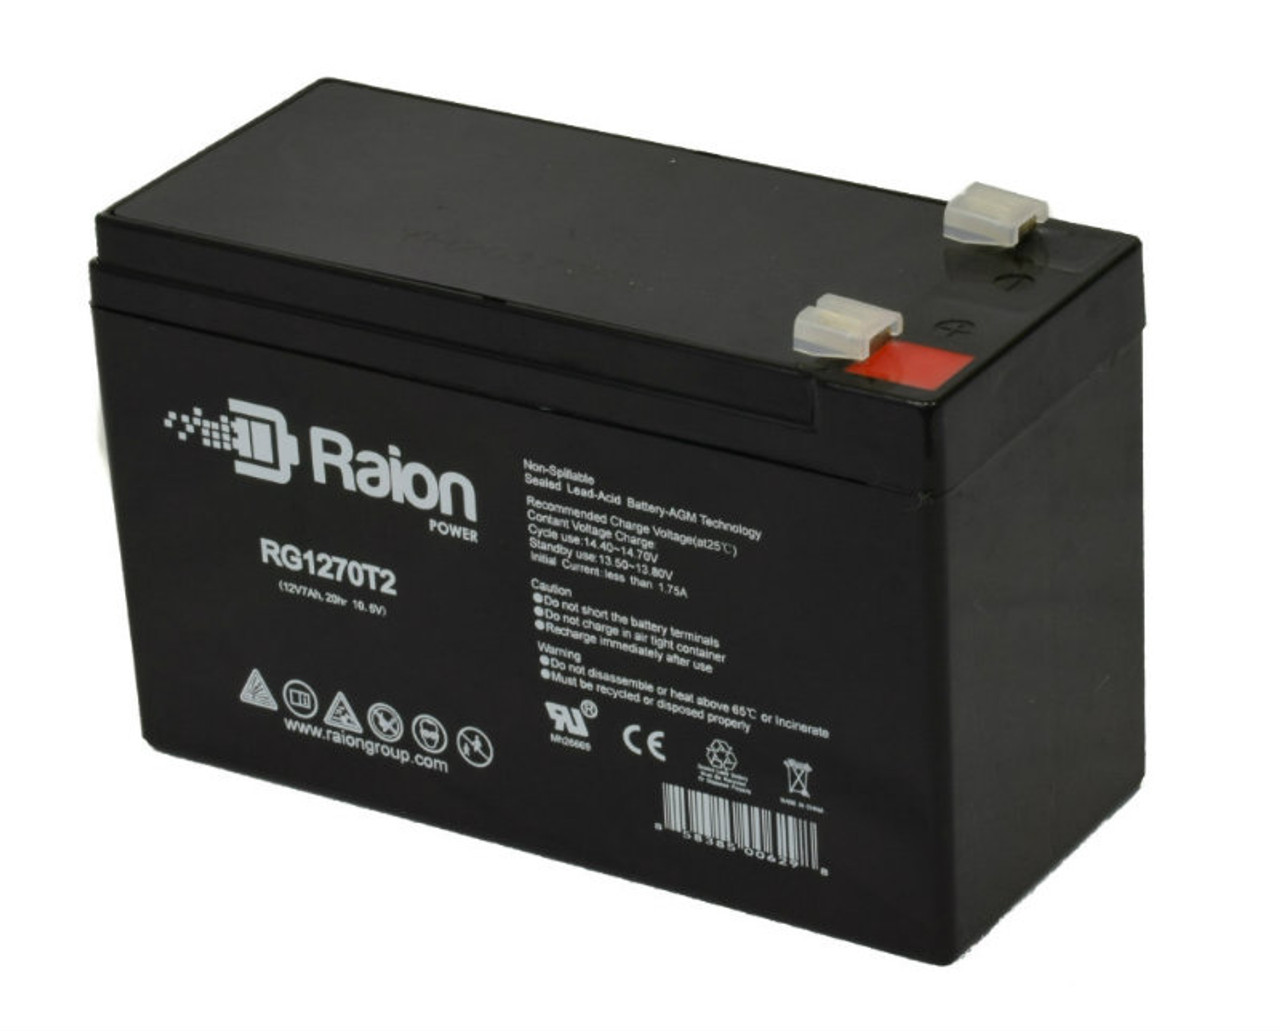 Raion Power RG1270T1 12V 7Ah Non-Spillable Replacement Battery for CGB CB1270 F1